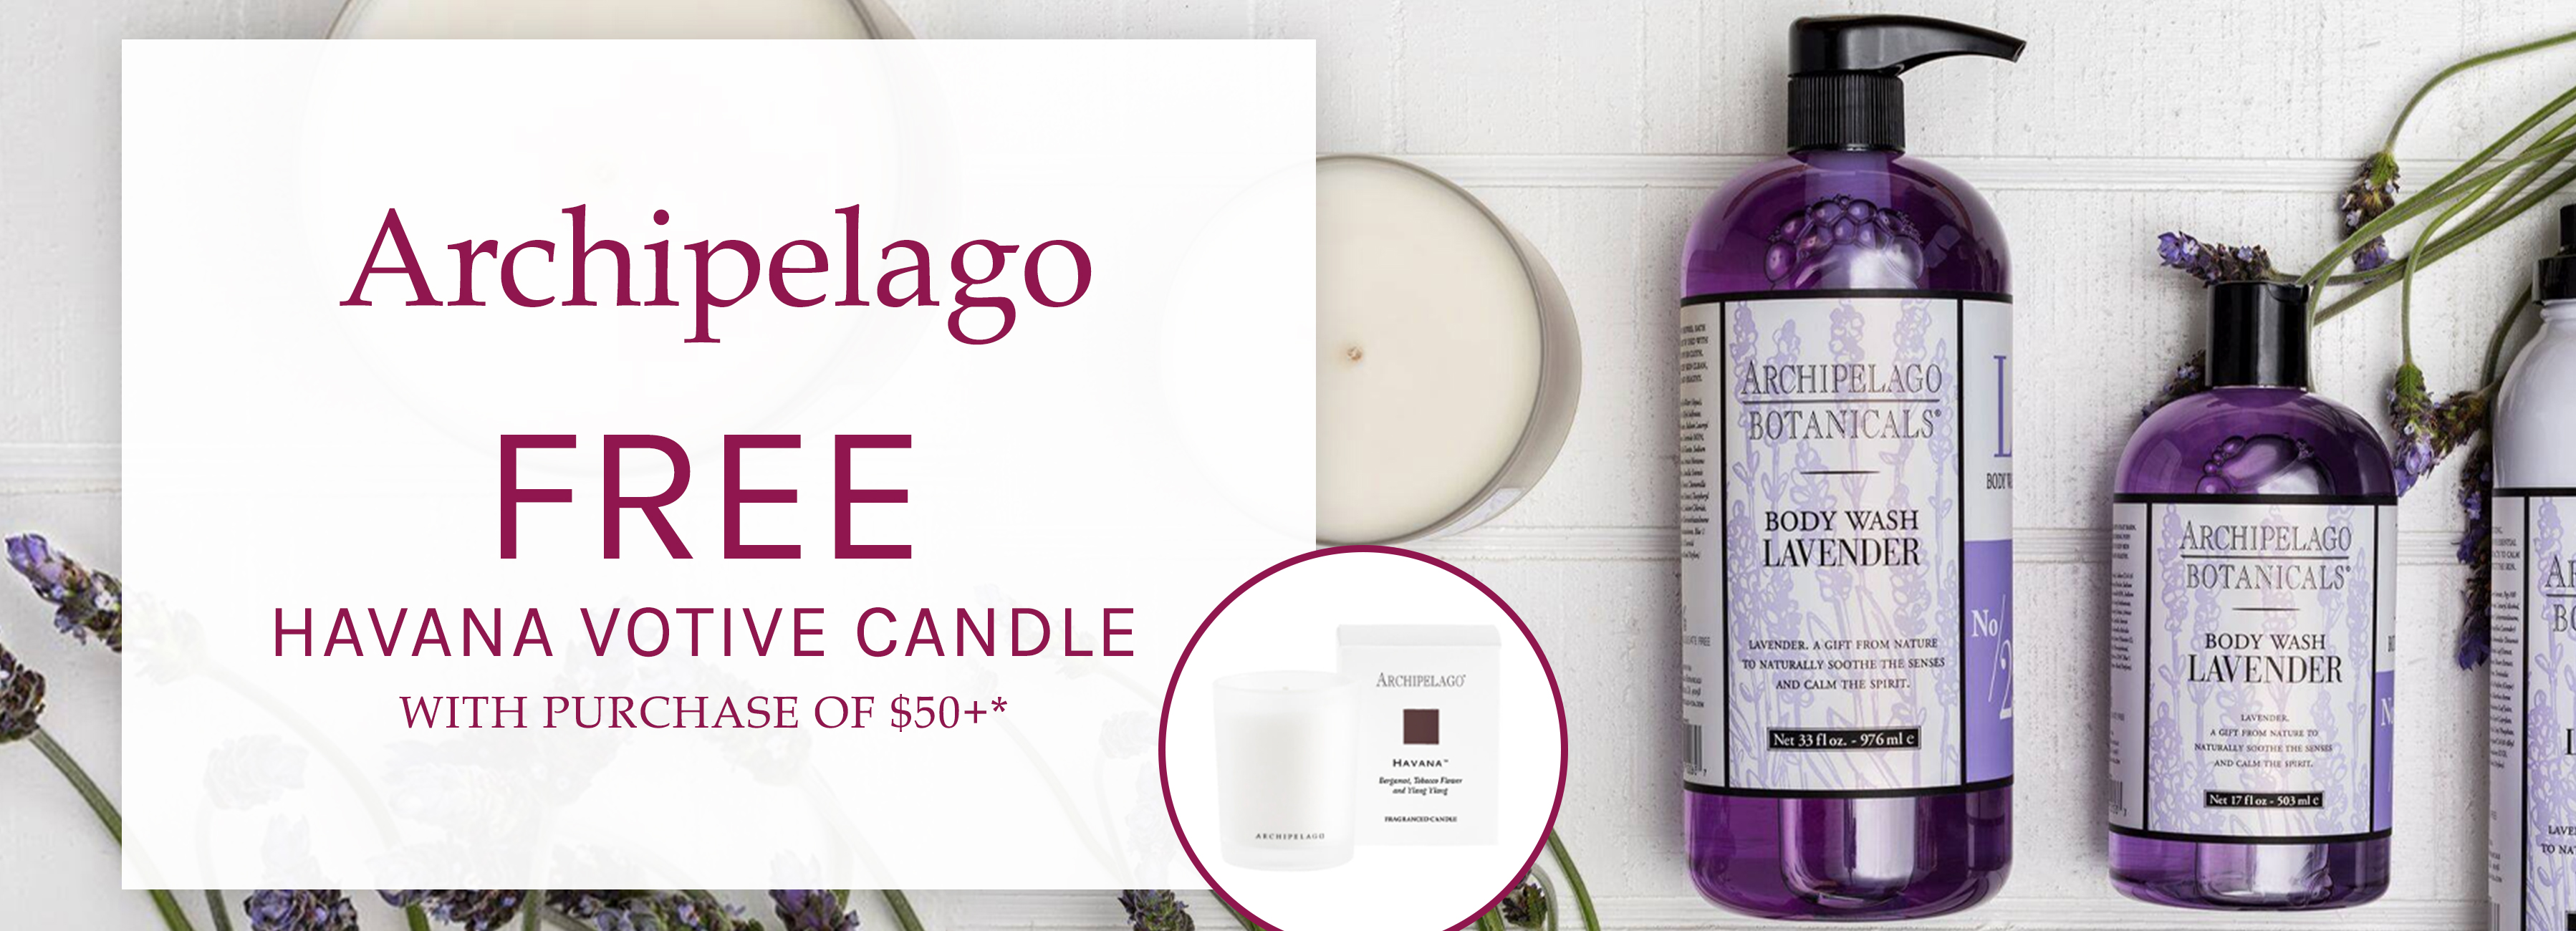 Archipelago - FREE havana votive candle with purchase of $50+